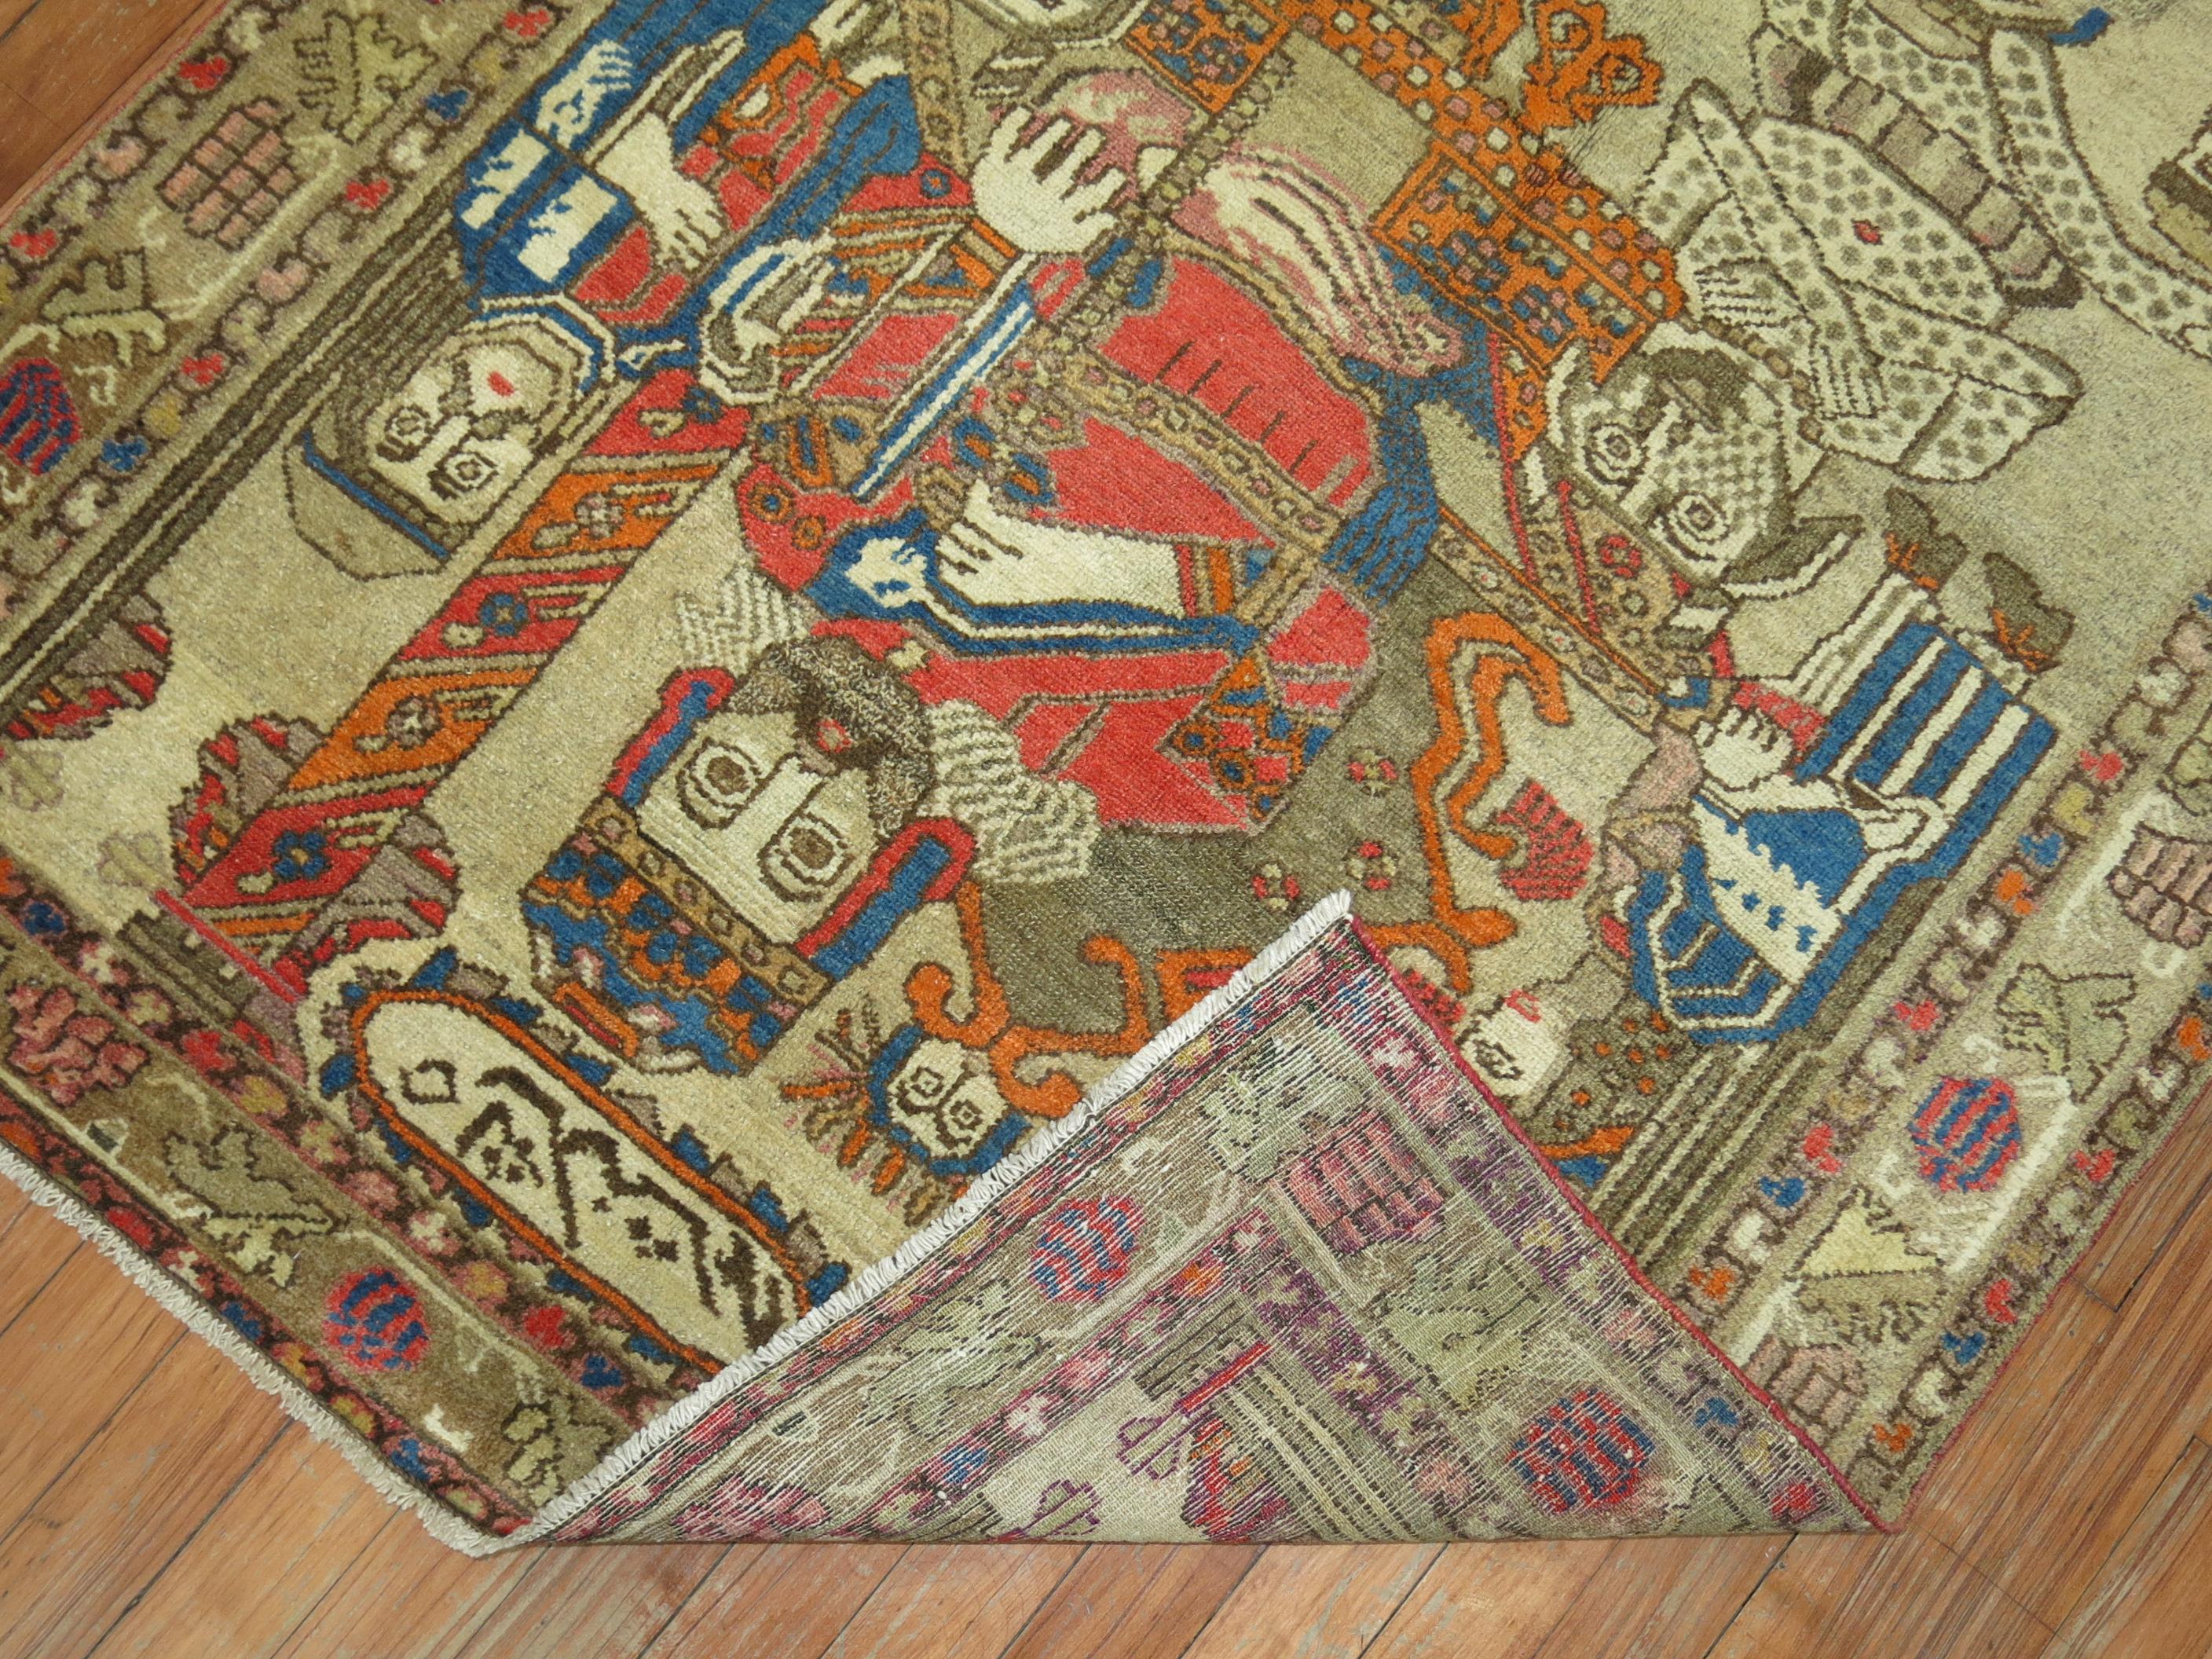 One of a kind mid-20th century highly decorative caliber Pictorial Persian Malayer rug.